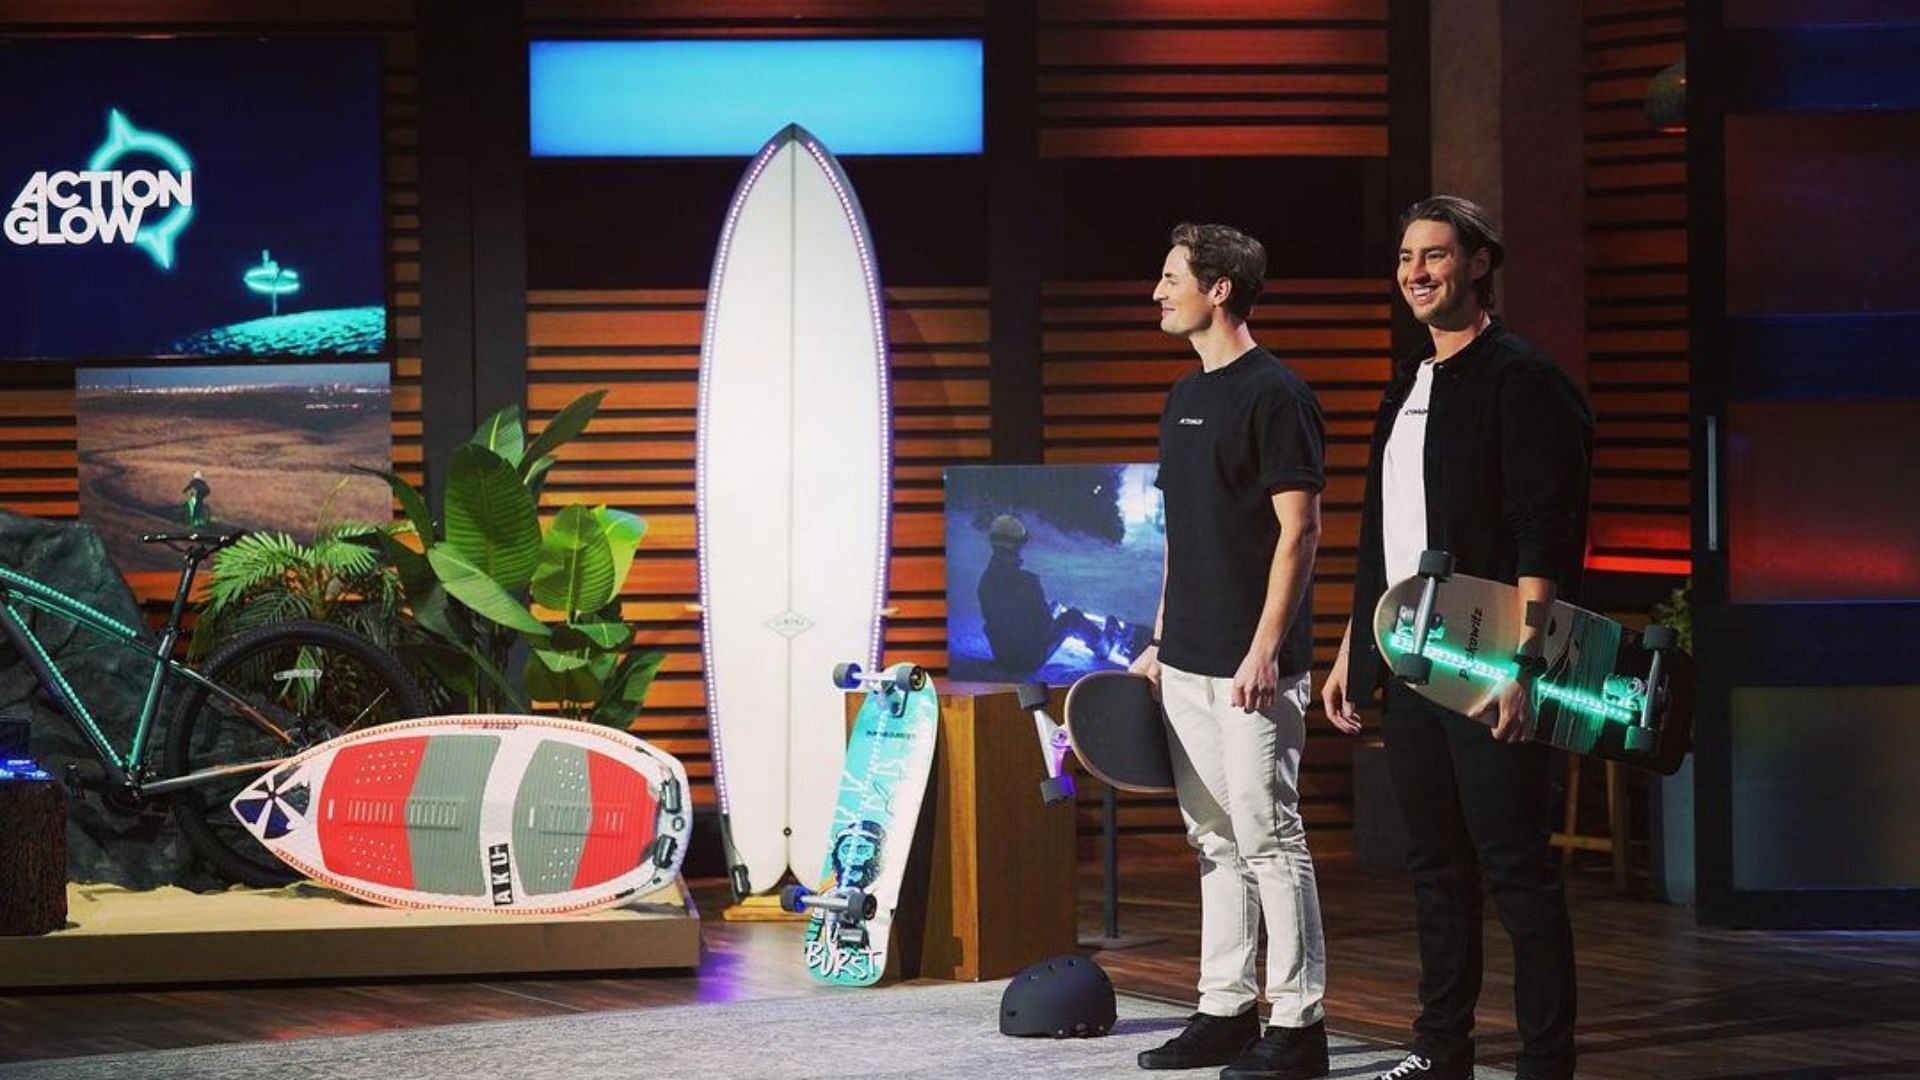 Episode 7 of Shark Tank airs Friday on ABC (Image via actionglow/Instagram)